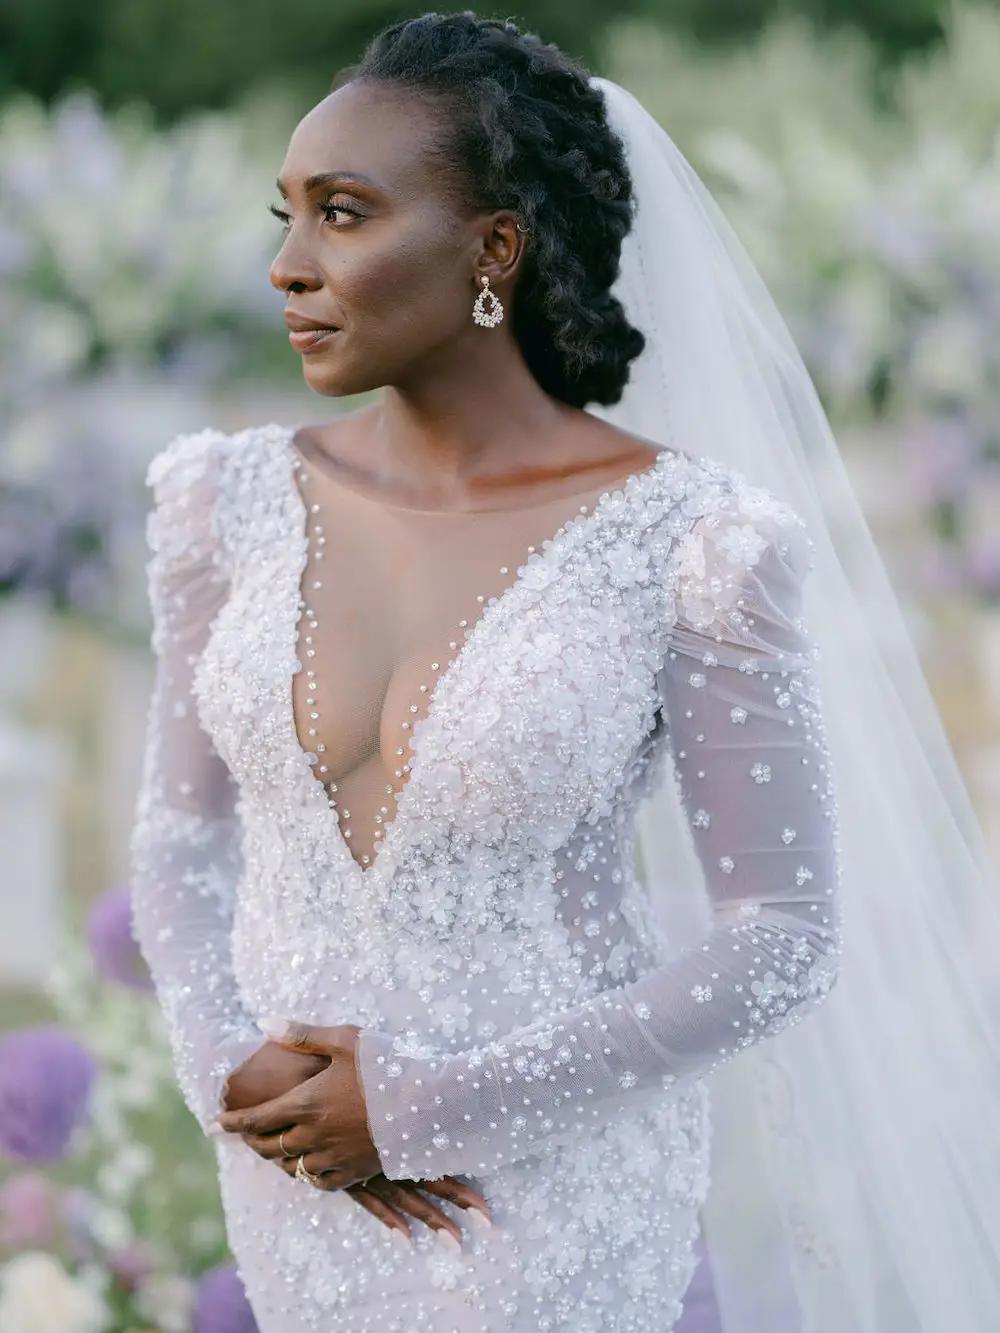 Agatha Wears Long Sleeve, Illusion Lace Wedding Dress with Pearls For Destination Wedding. Mobile Image